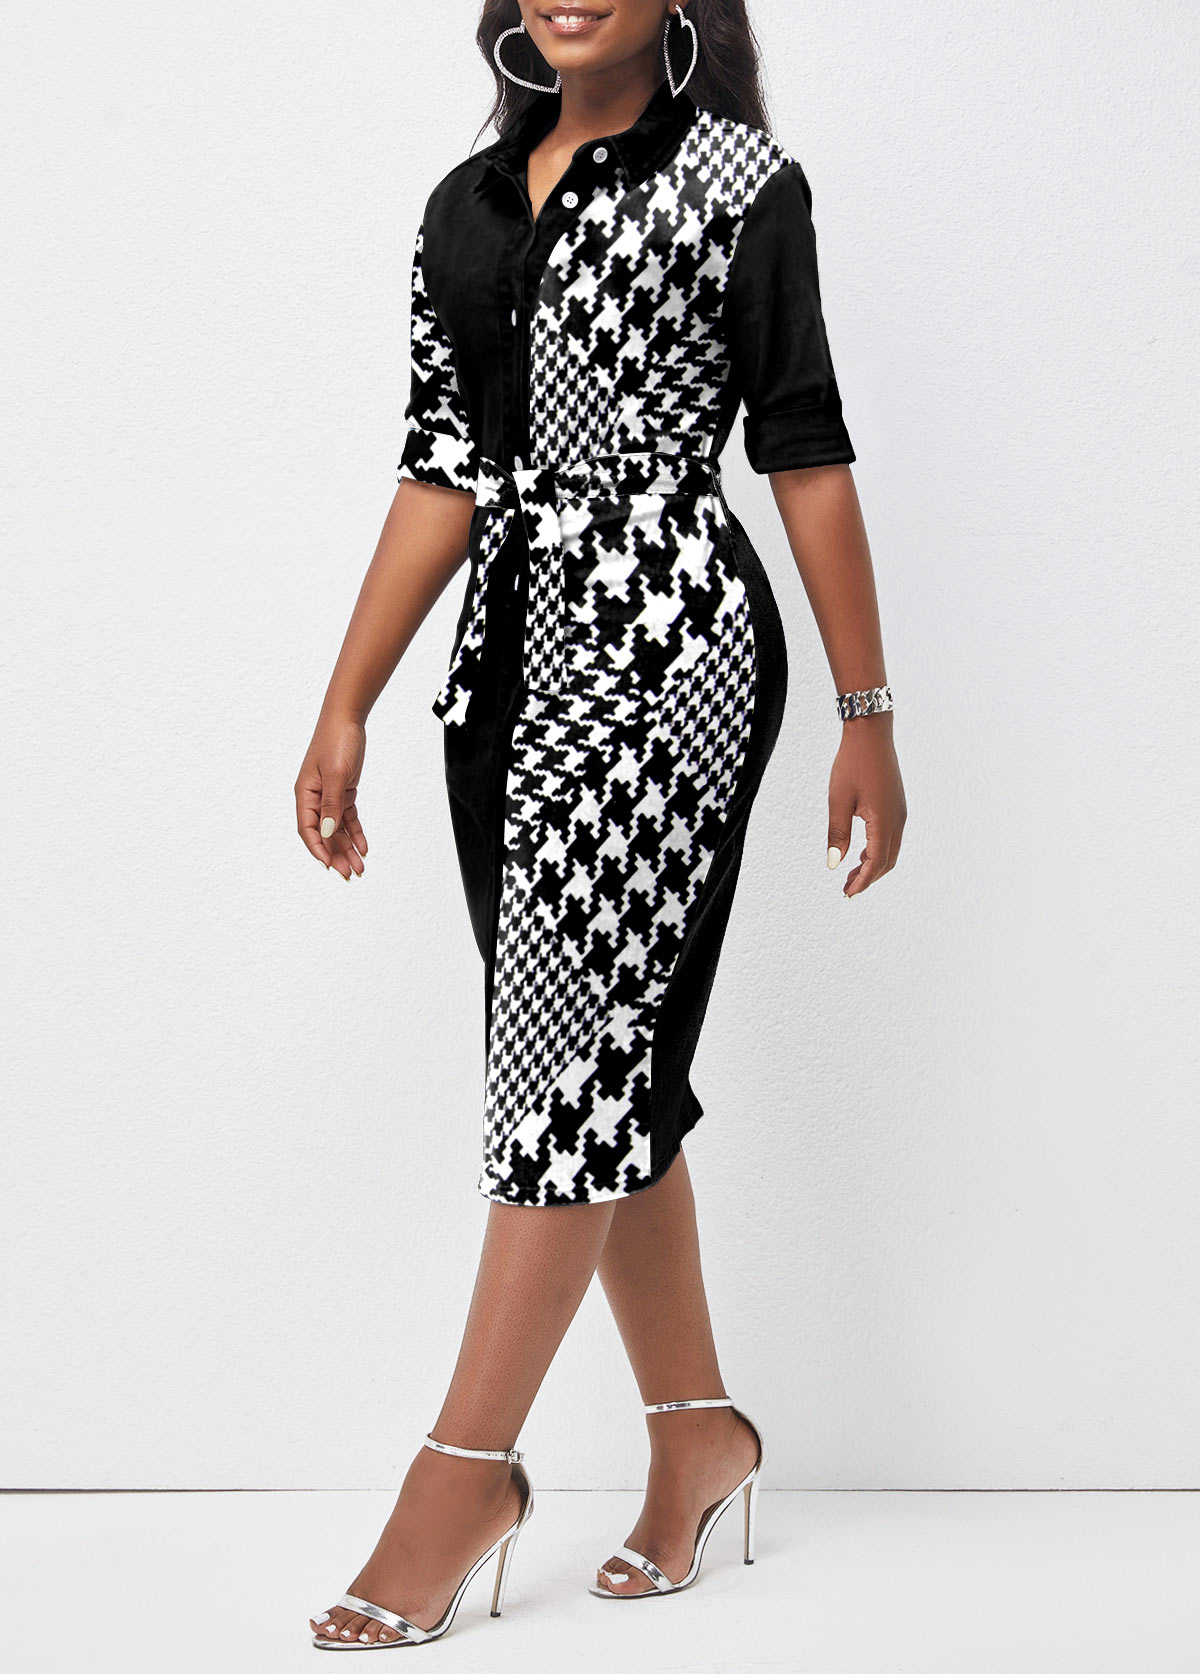 Houndstooth Print Button Belted Black Bodycon Dress